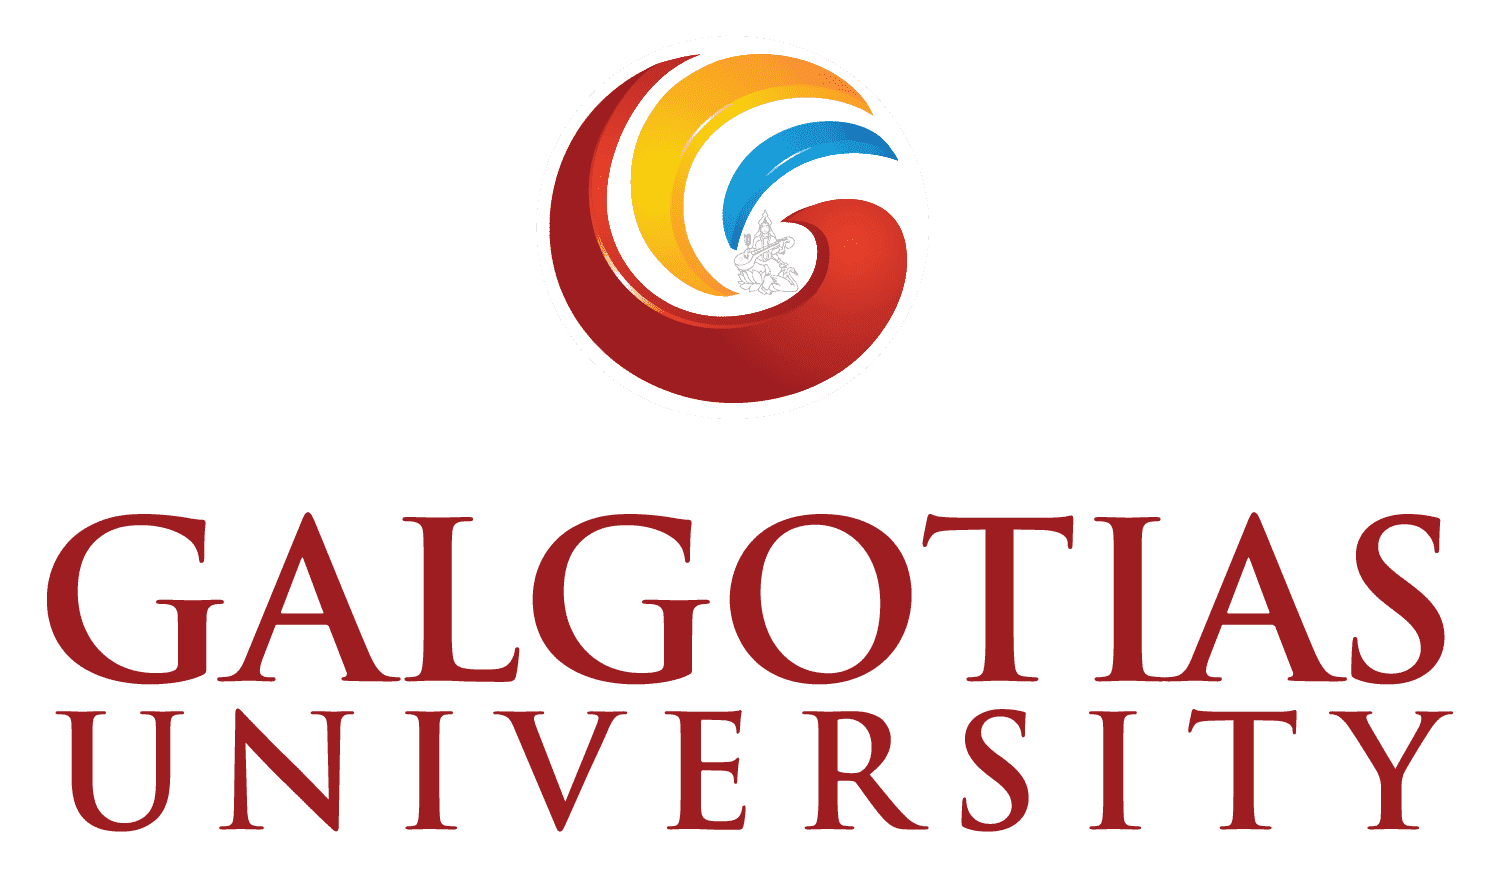 Galgotias University Rises to the Top, Achieving 3rd Place Among India's Academic Patent Innovators